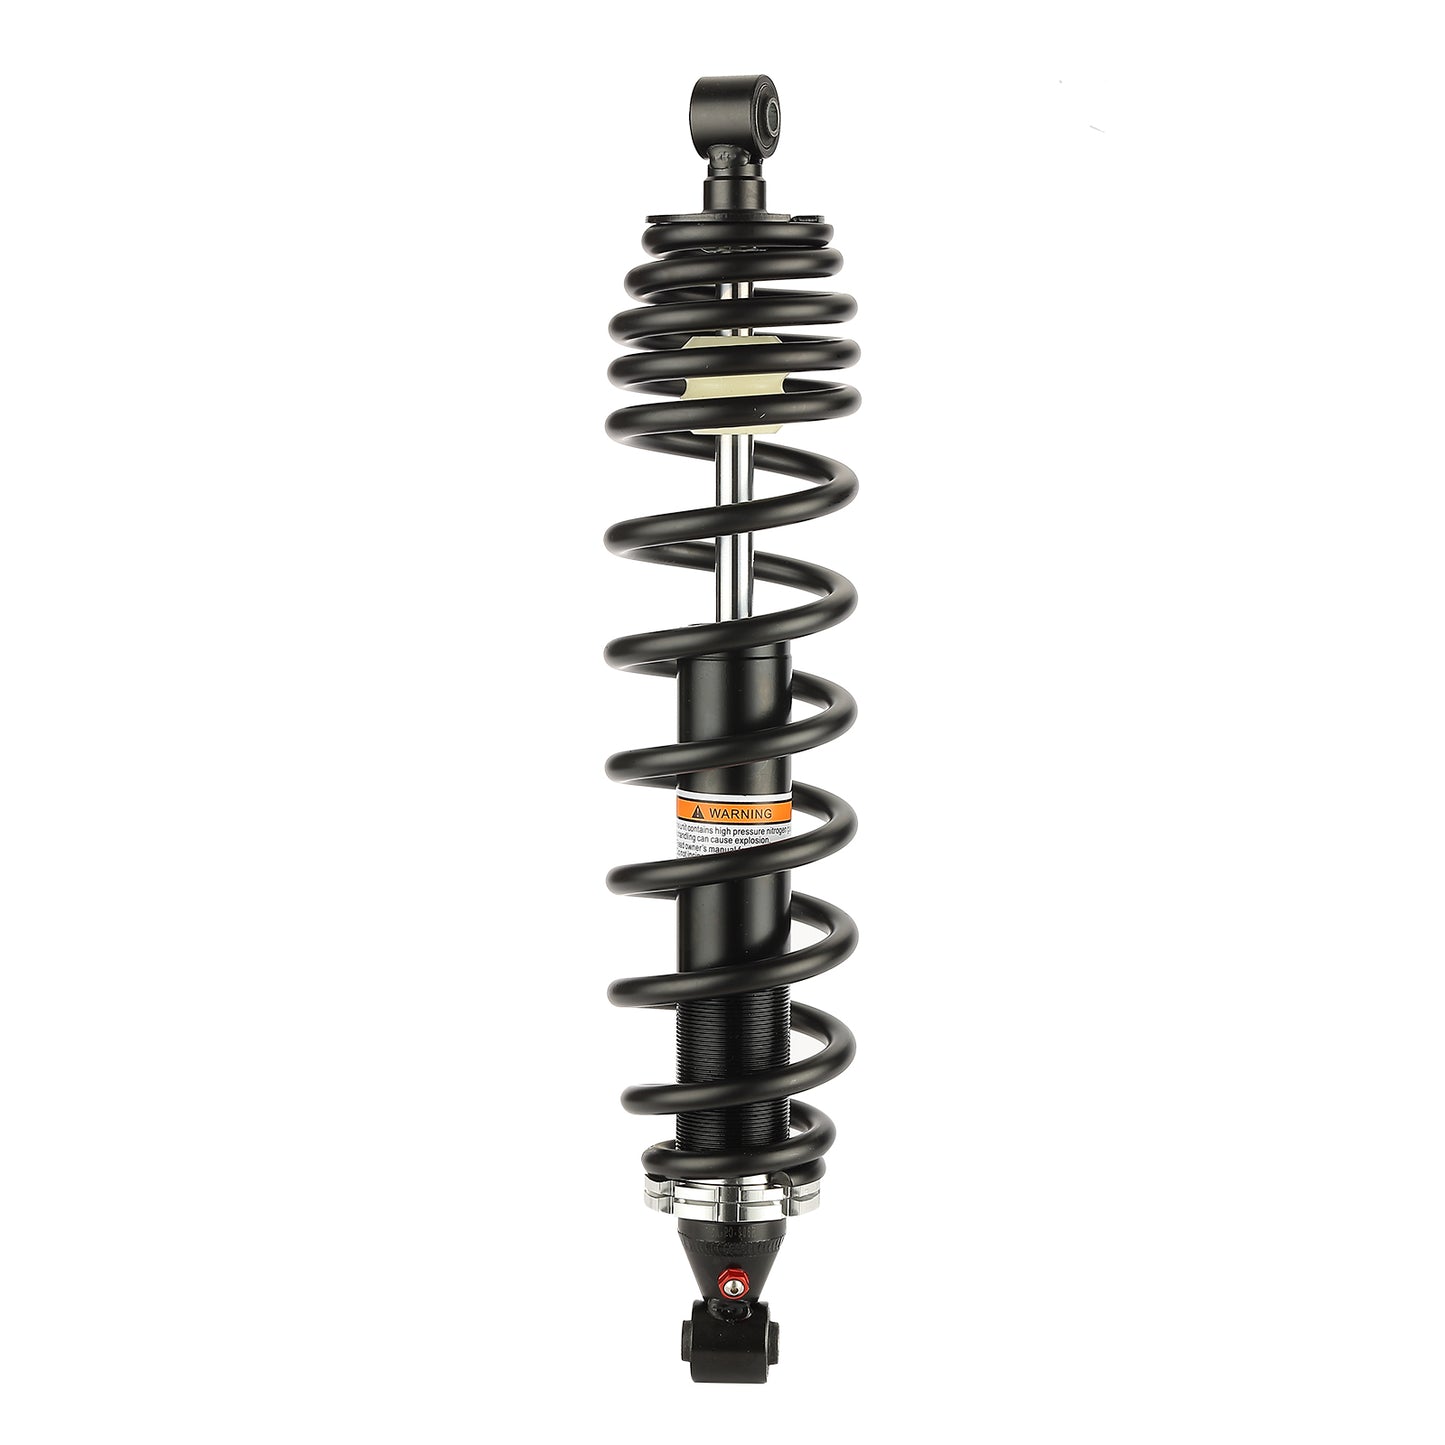 CAM-PO906 Caiman Shock Absorber Rear Left Right Shock Absorber Replacement for 2004-2013 Polaris Ranger 500 2X4, 4X4, 6X6 700 6X6 500 Touring HO 500 Touring EFI X2 500, X2 700, X2 800 Rear Shock